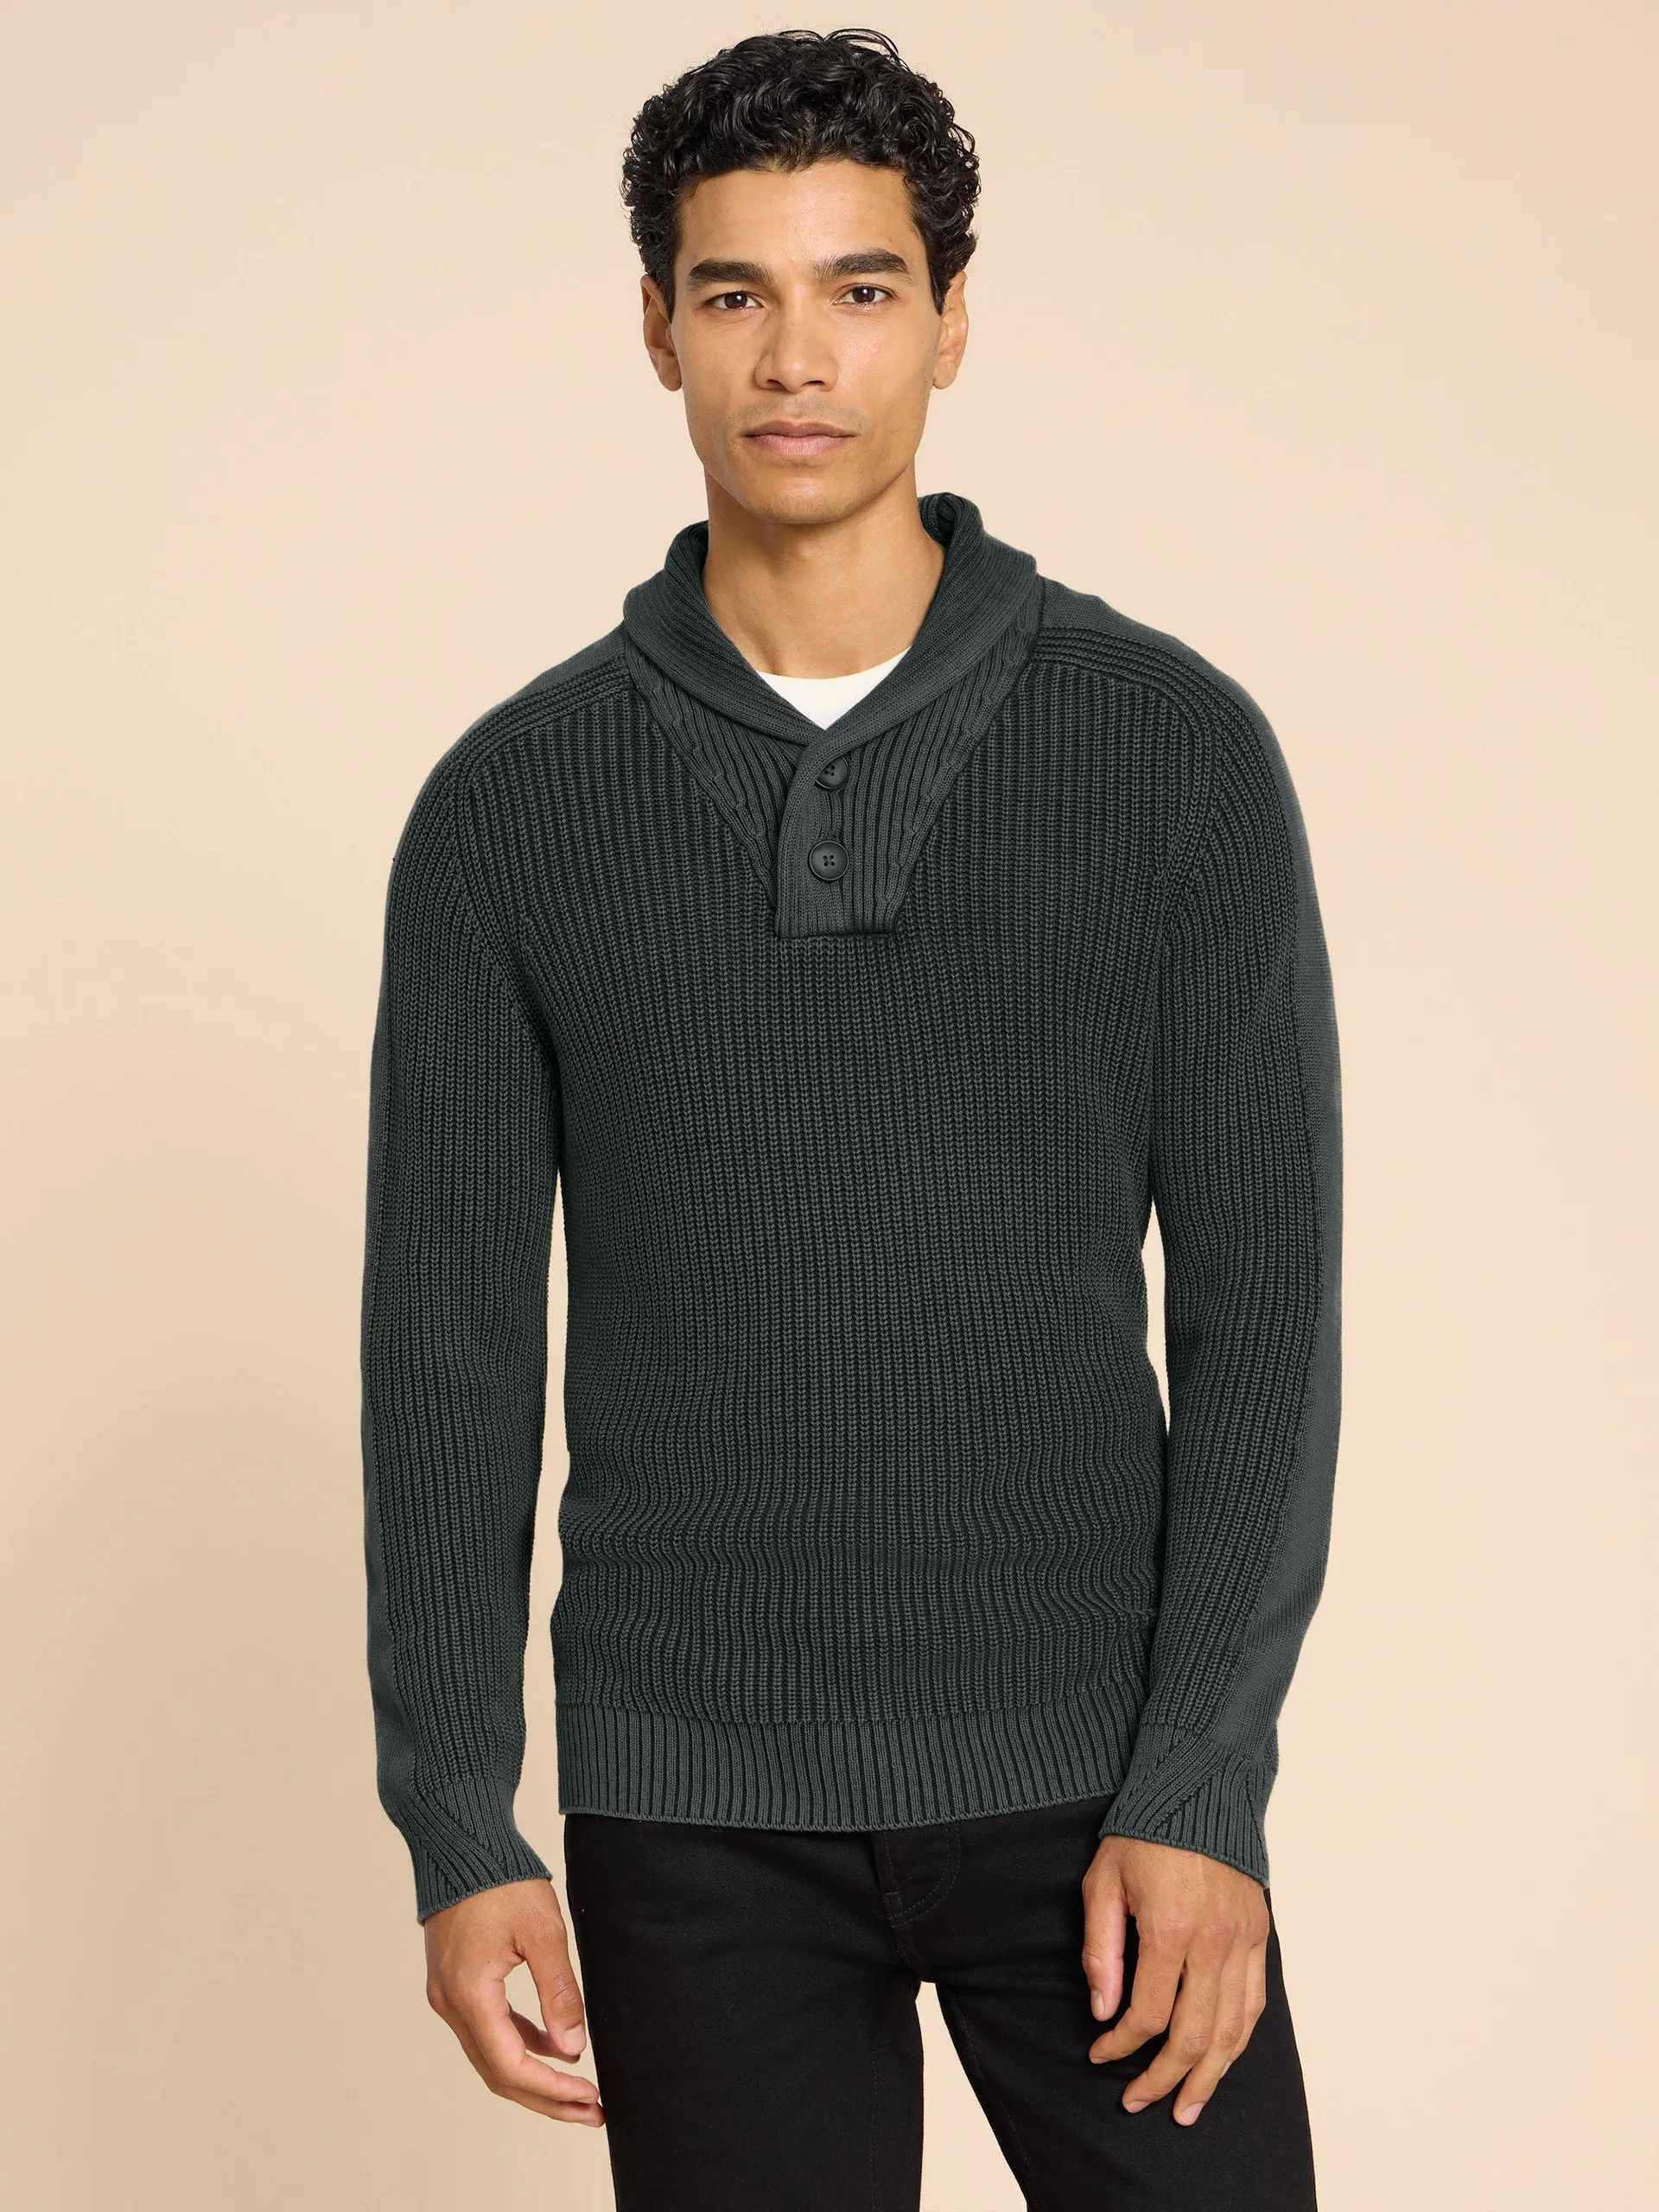 Ribbed Shawl Neck Jumper in CHARCOAL GREY